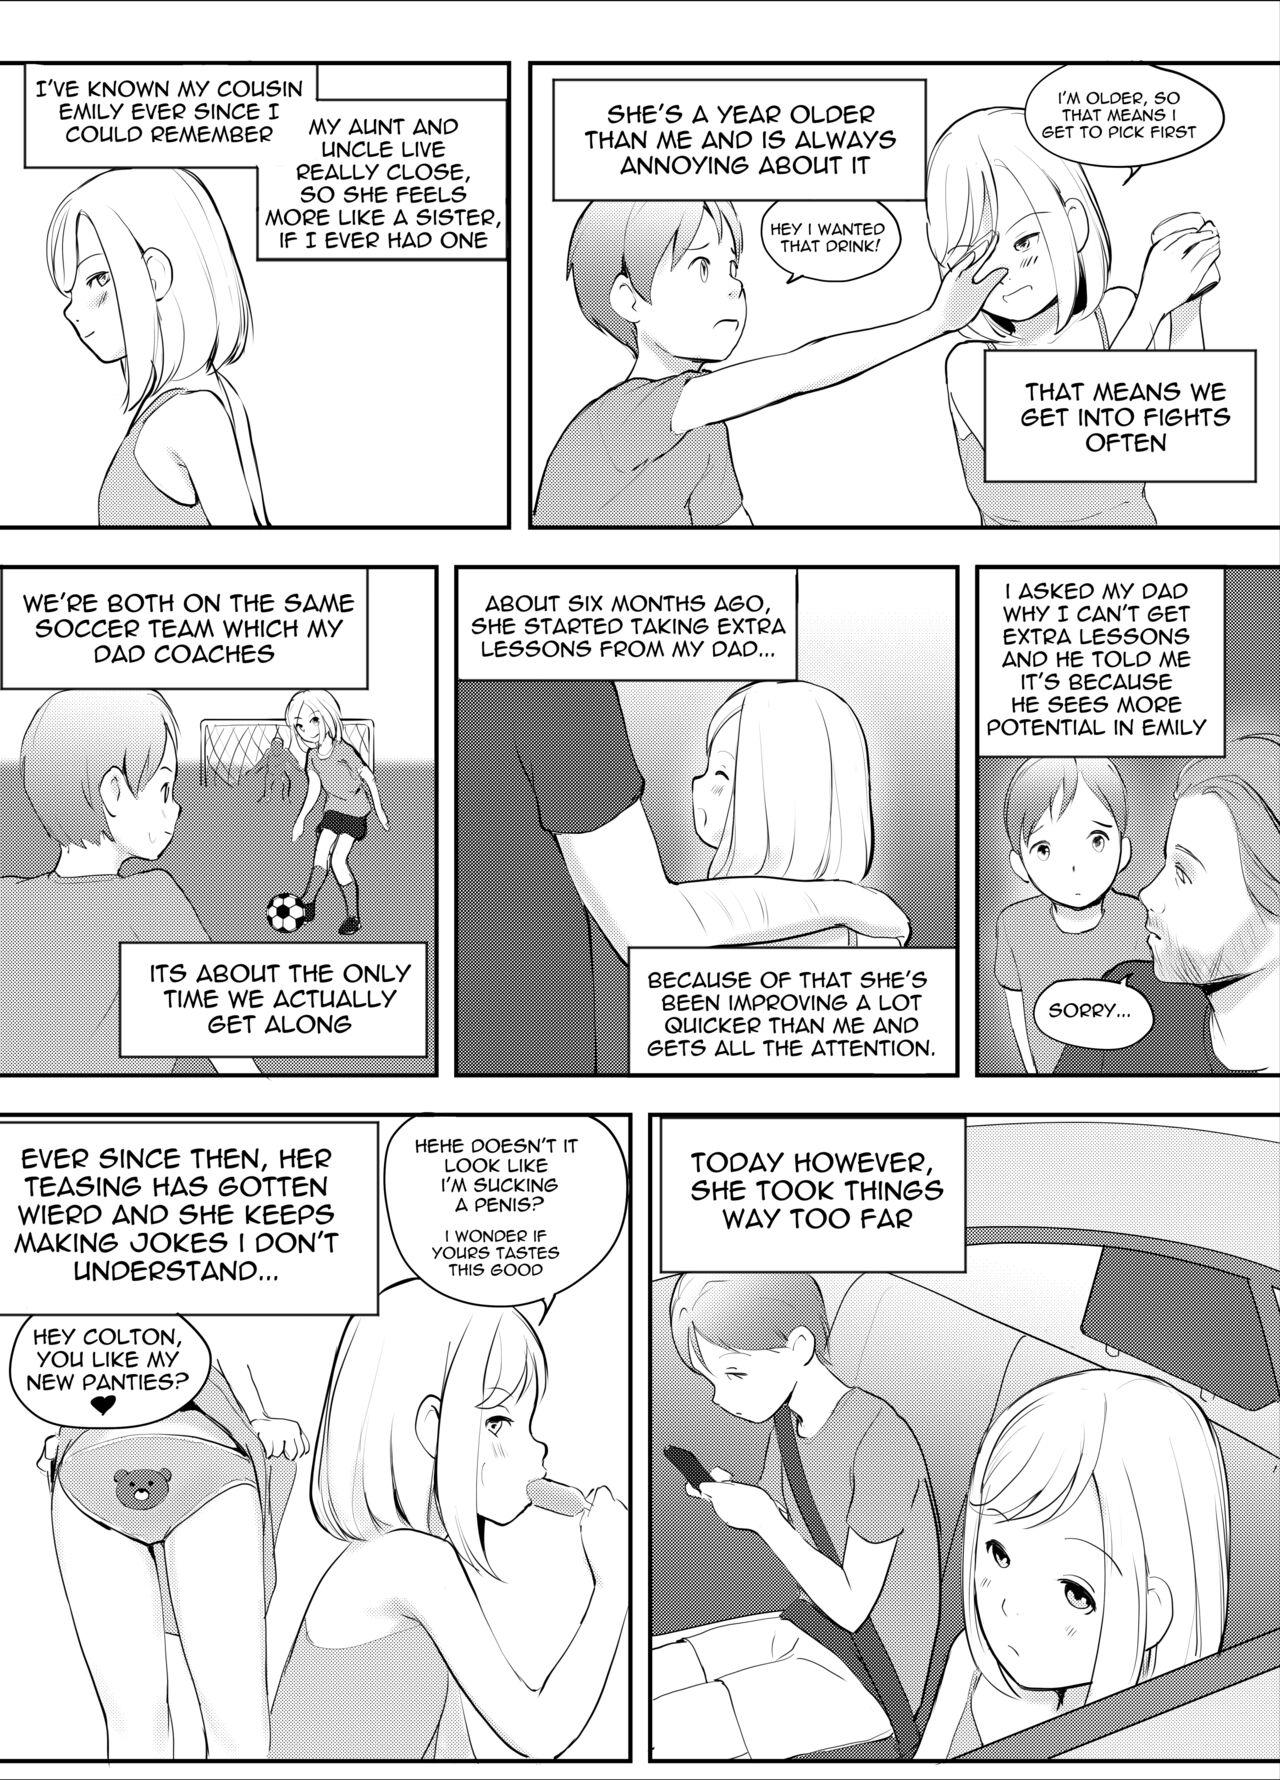 Shorts Passing the Time - Original Best Blow Jobs Ever - Page 2